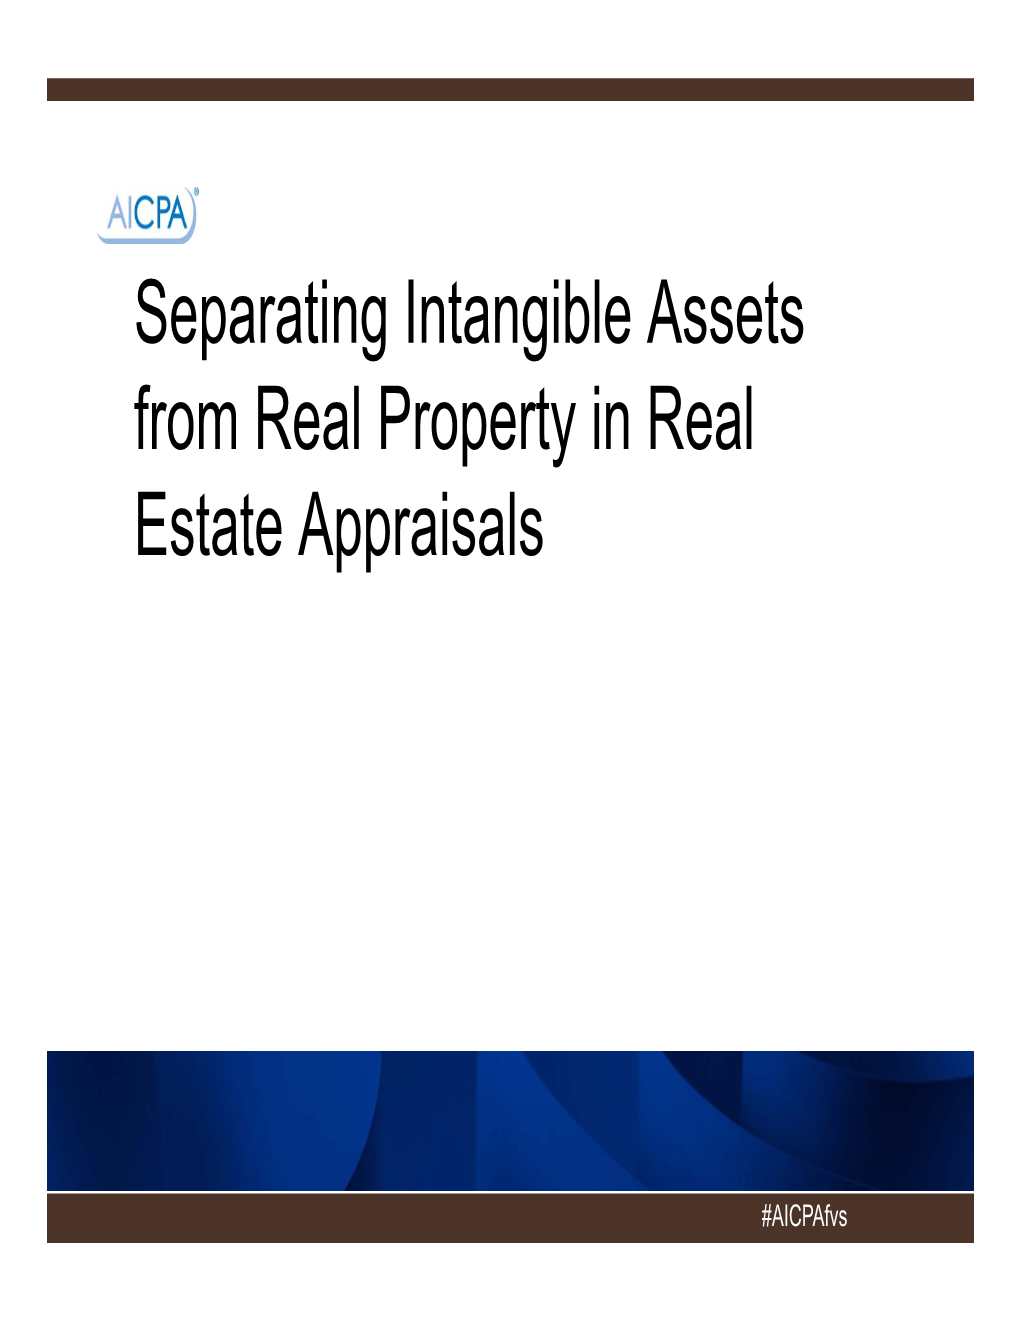 Separating Intangible Assets from Real Property in Real Estate Appraisals